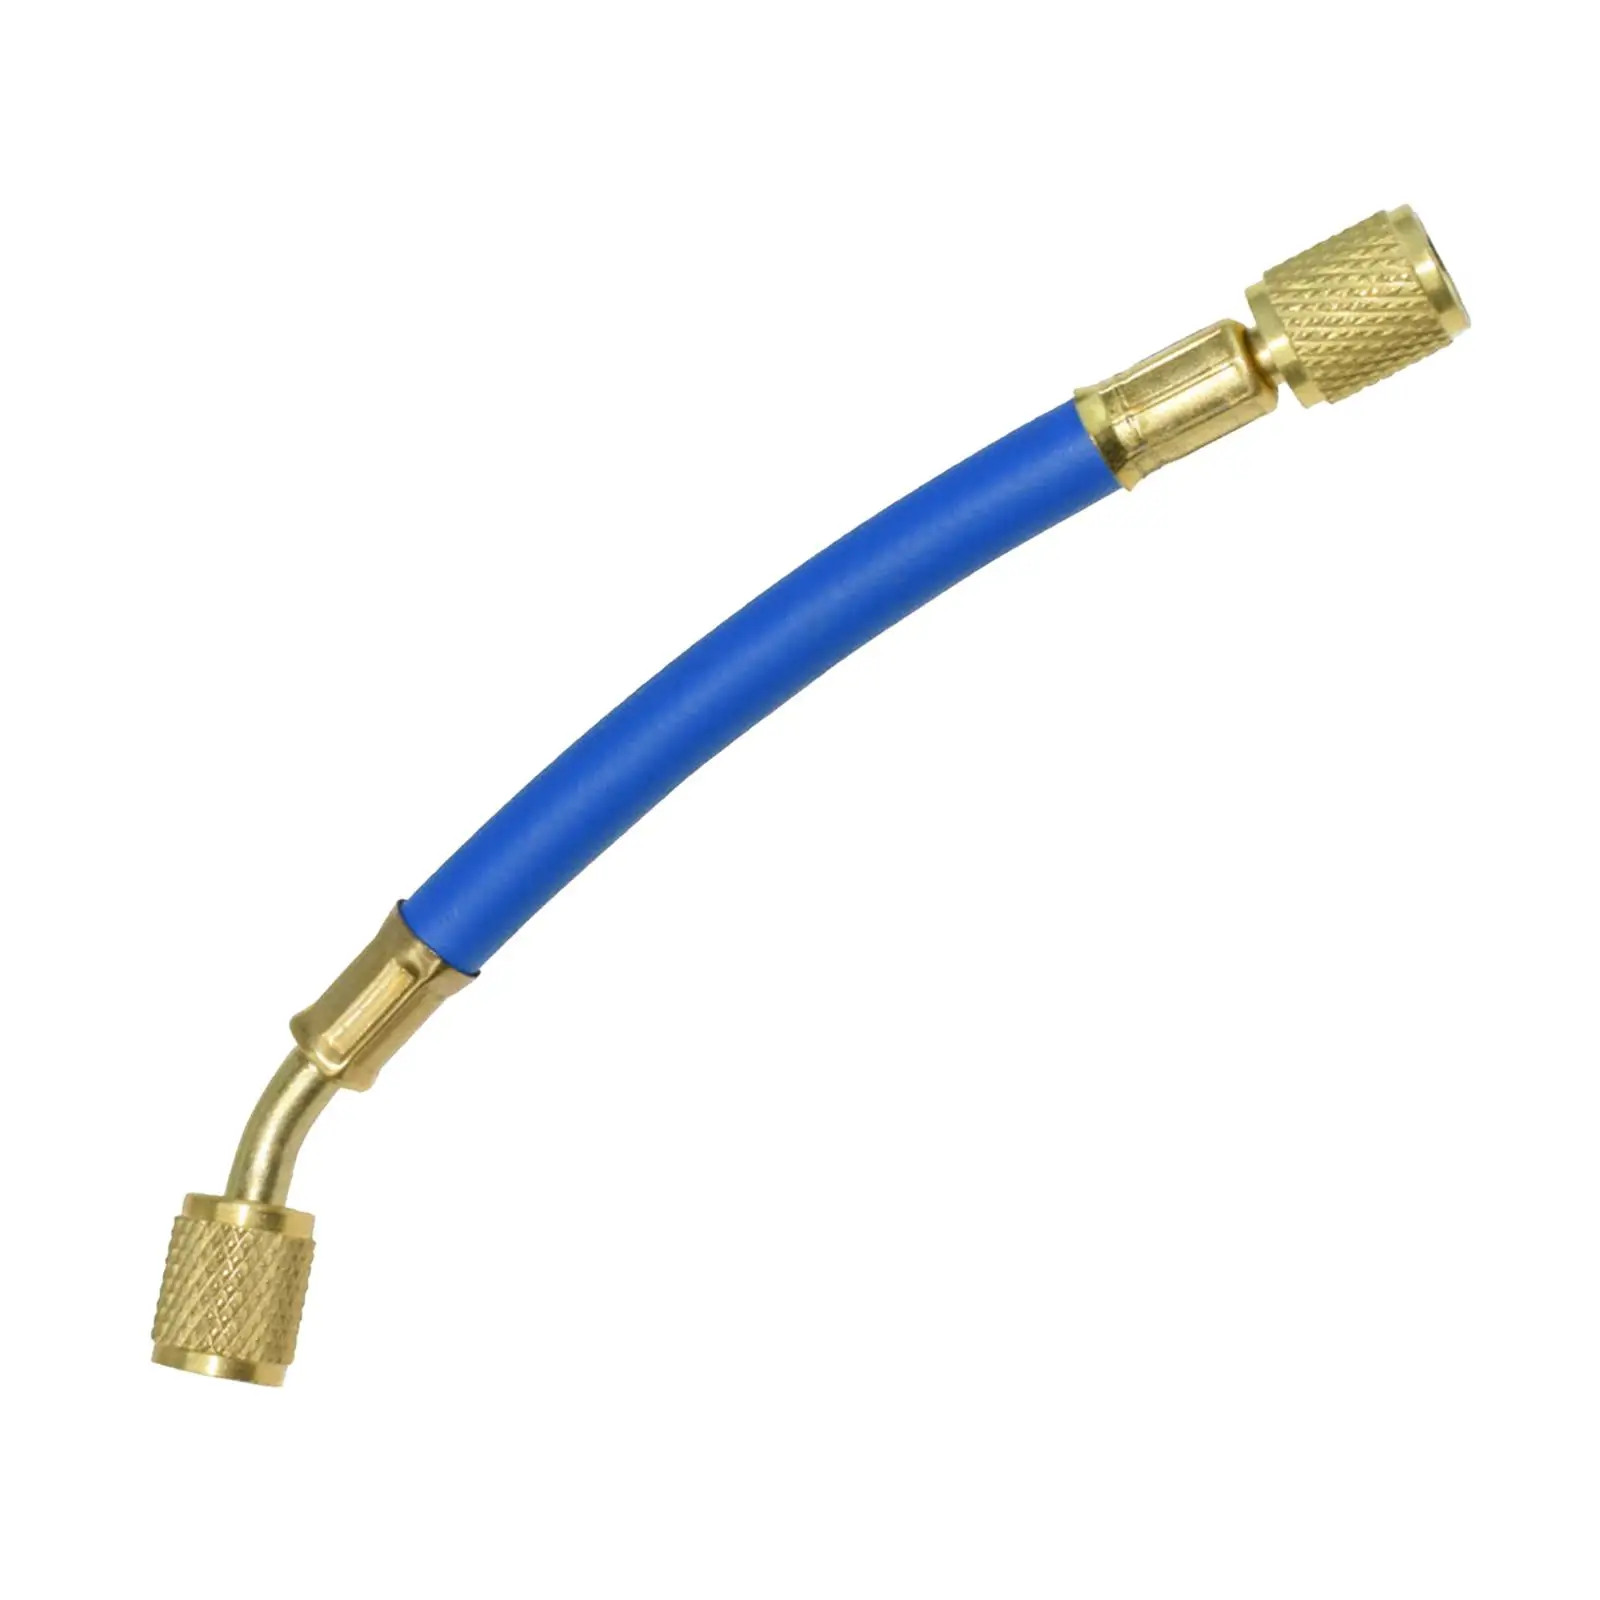 Auto Condensation Hoses Connection Pipe Coupler 1/4 inch 15cm Refrigerant Low Pressure Coolant Refill Tool for Truck Car